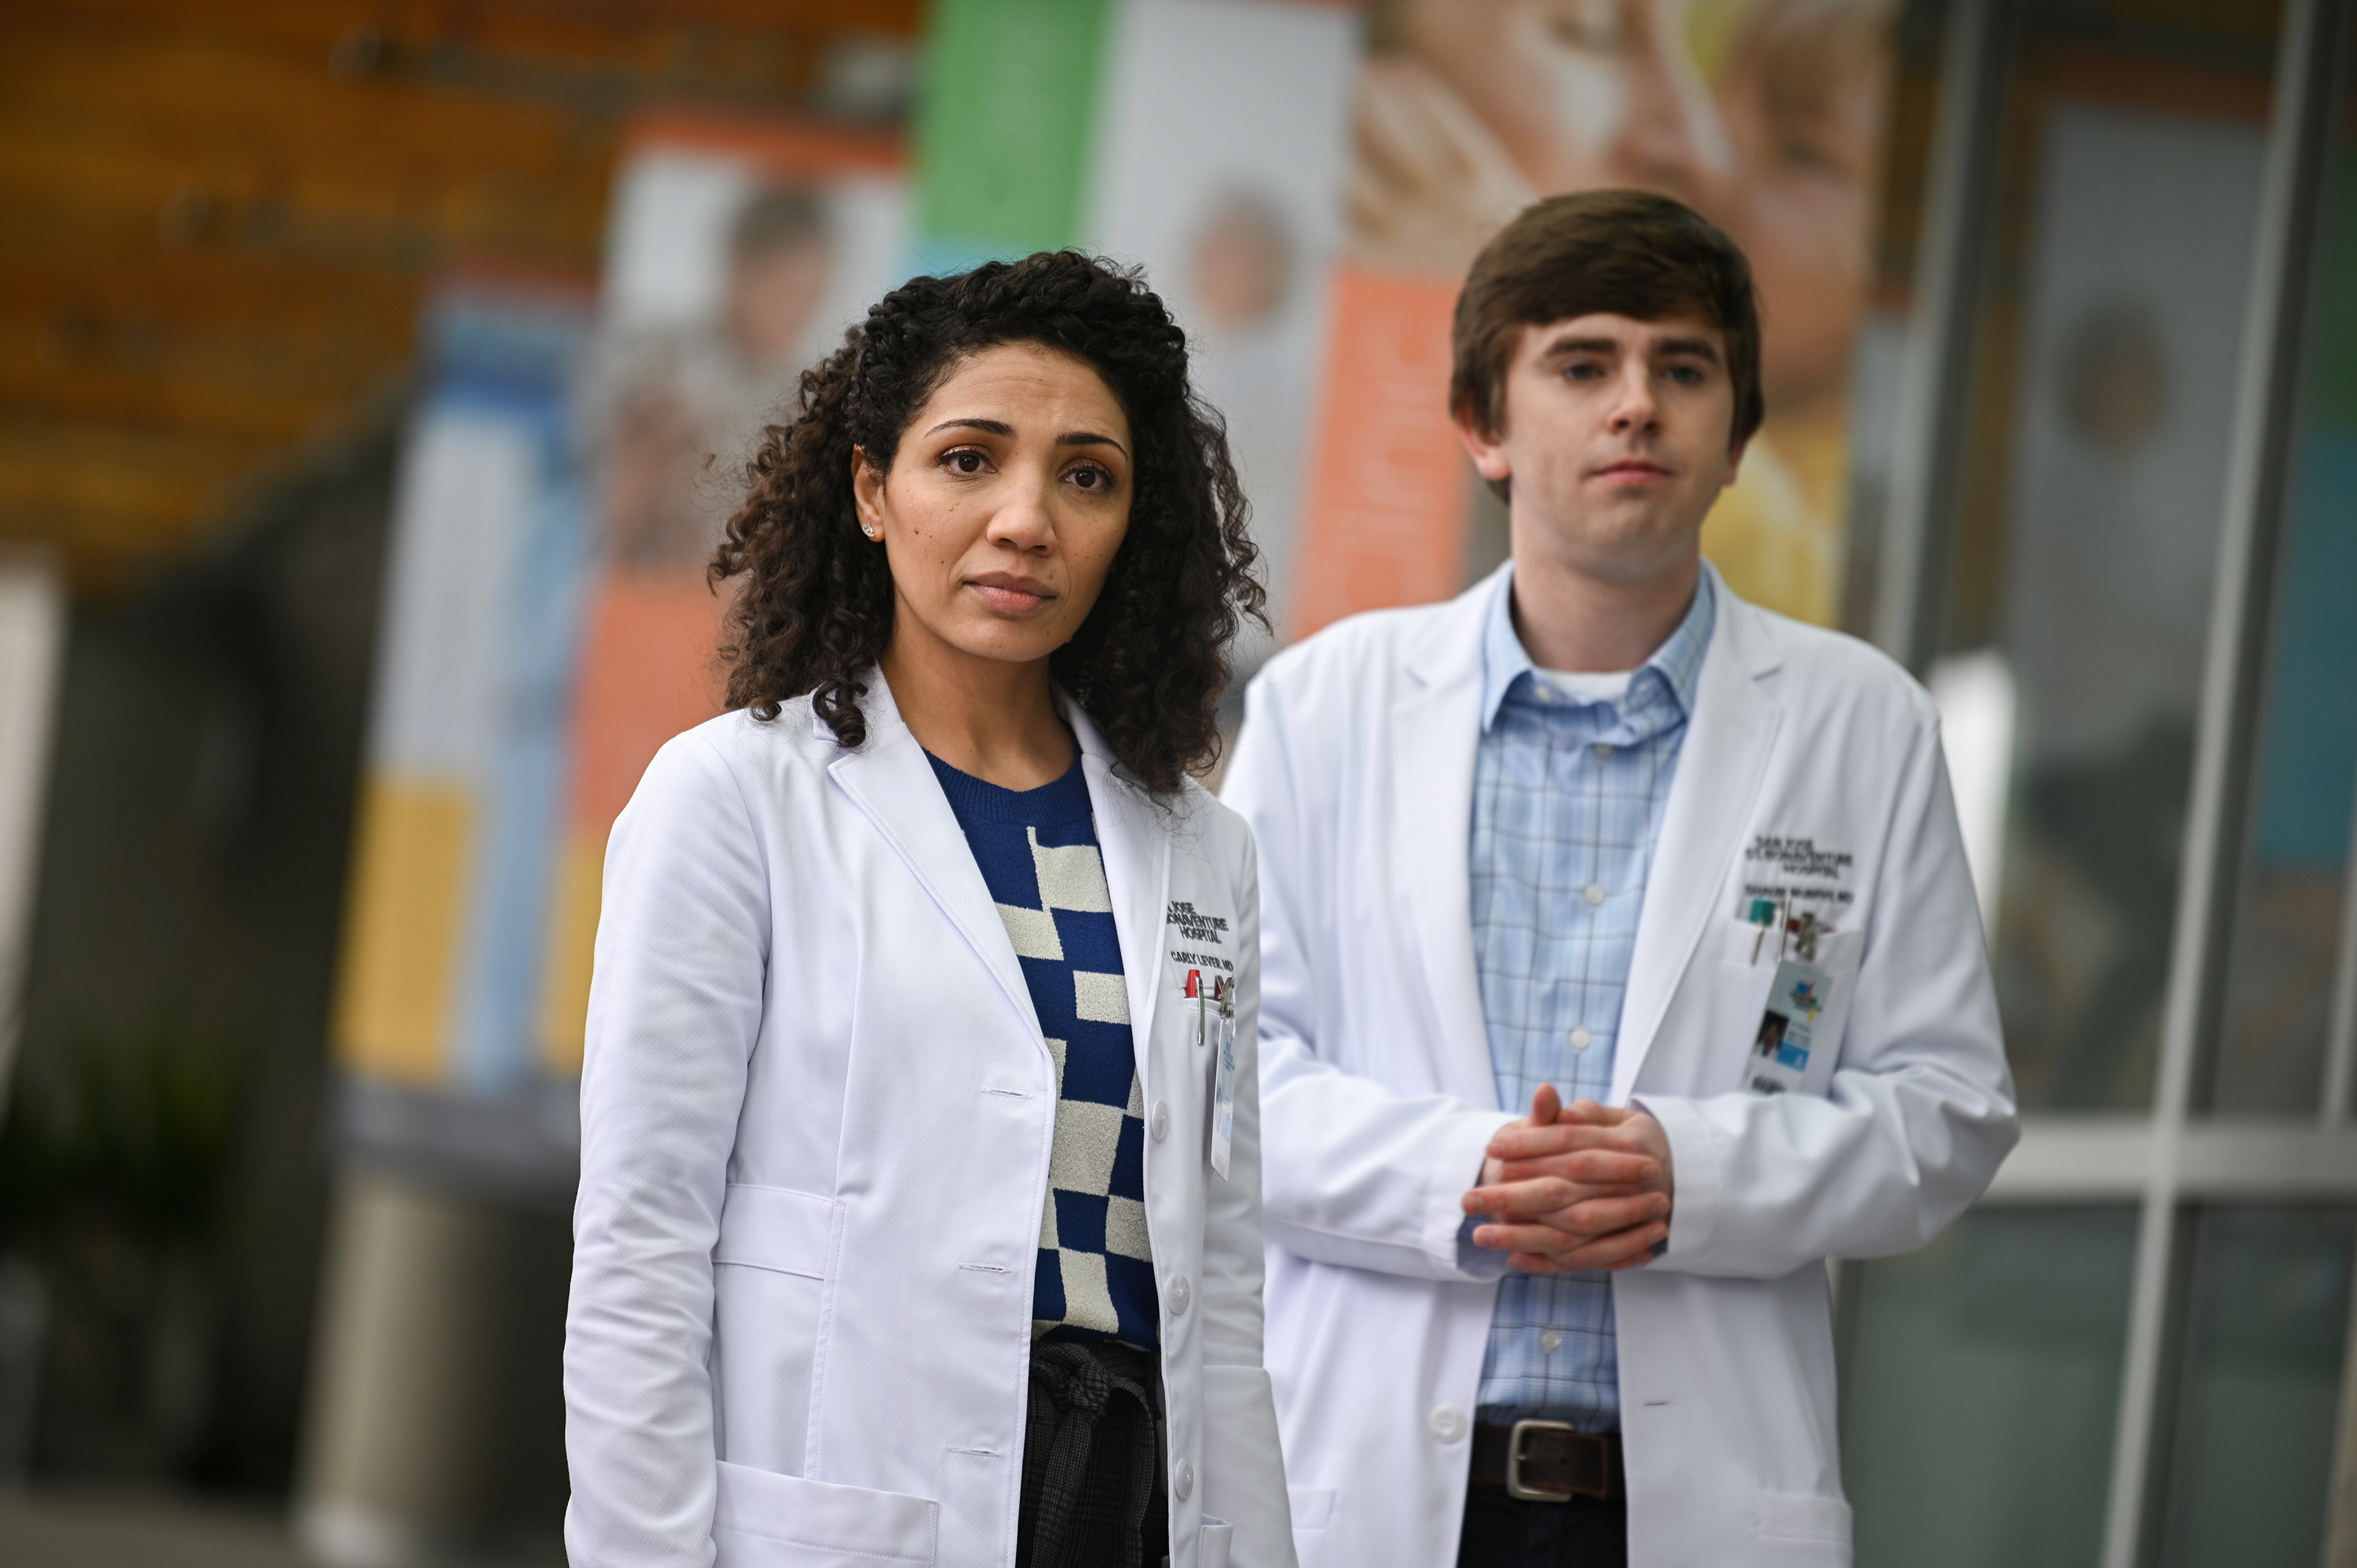 The show follows the life and career of a young surgeon with autism and savant syndrome